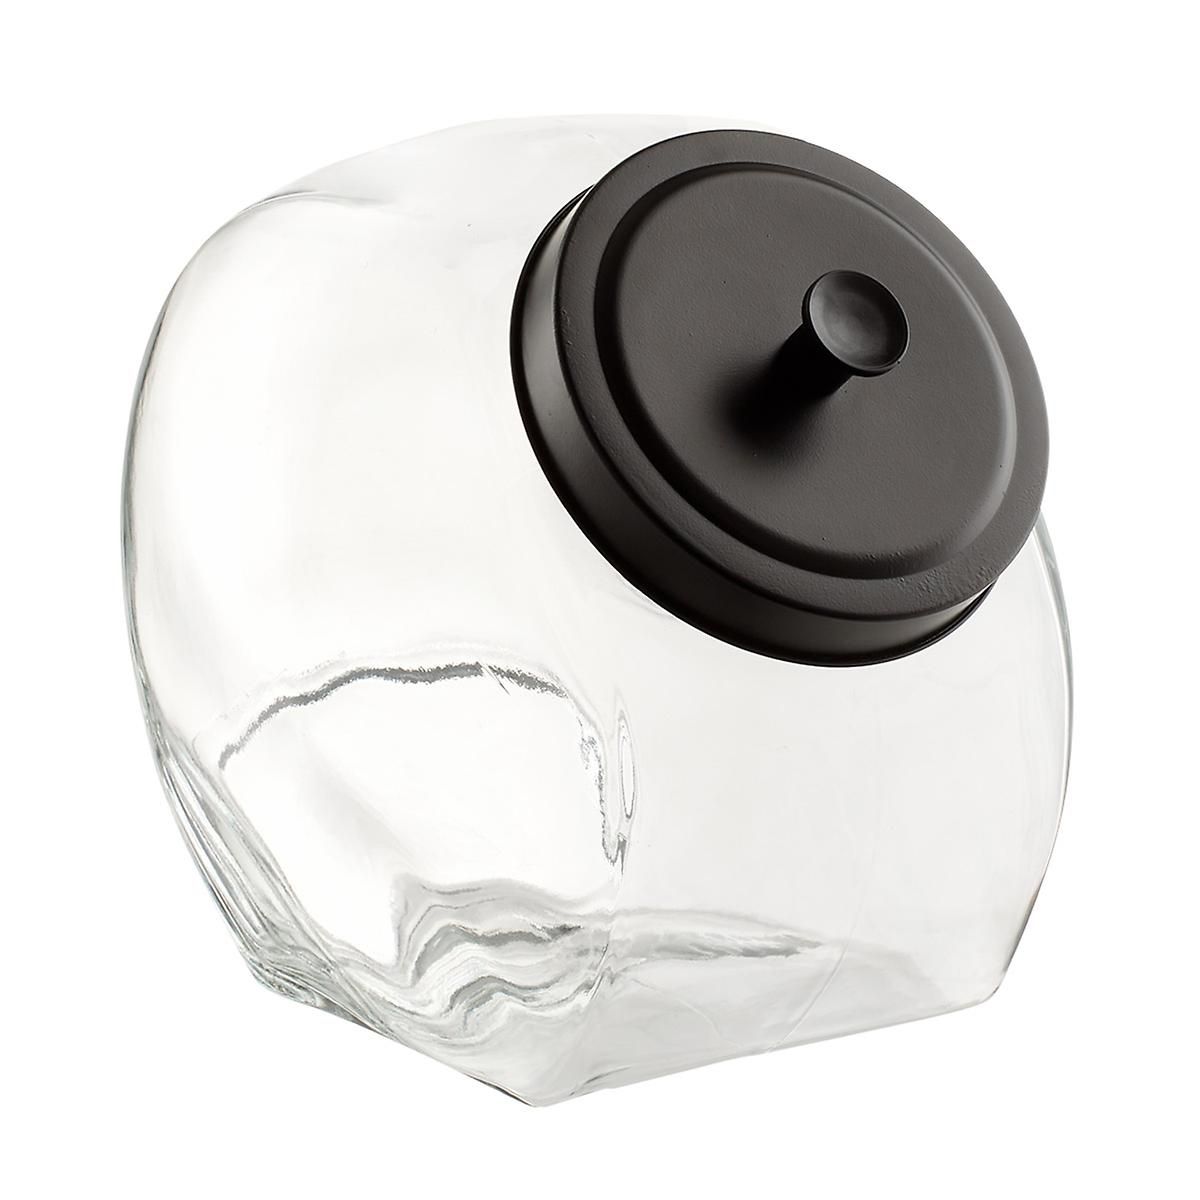 1 gal. Glass Slant Jar with Matte Black Lid | The Container Store